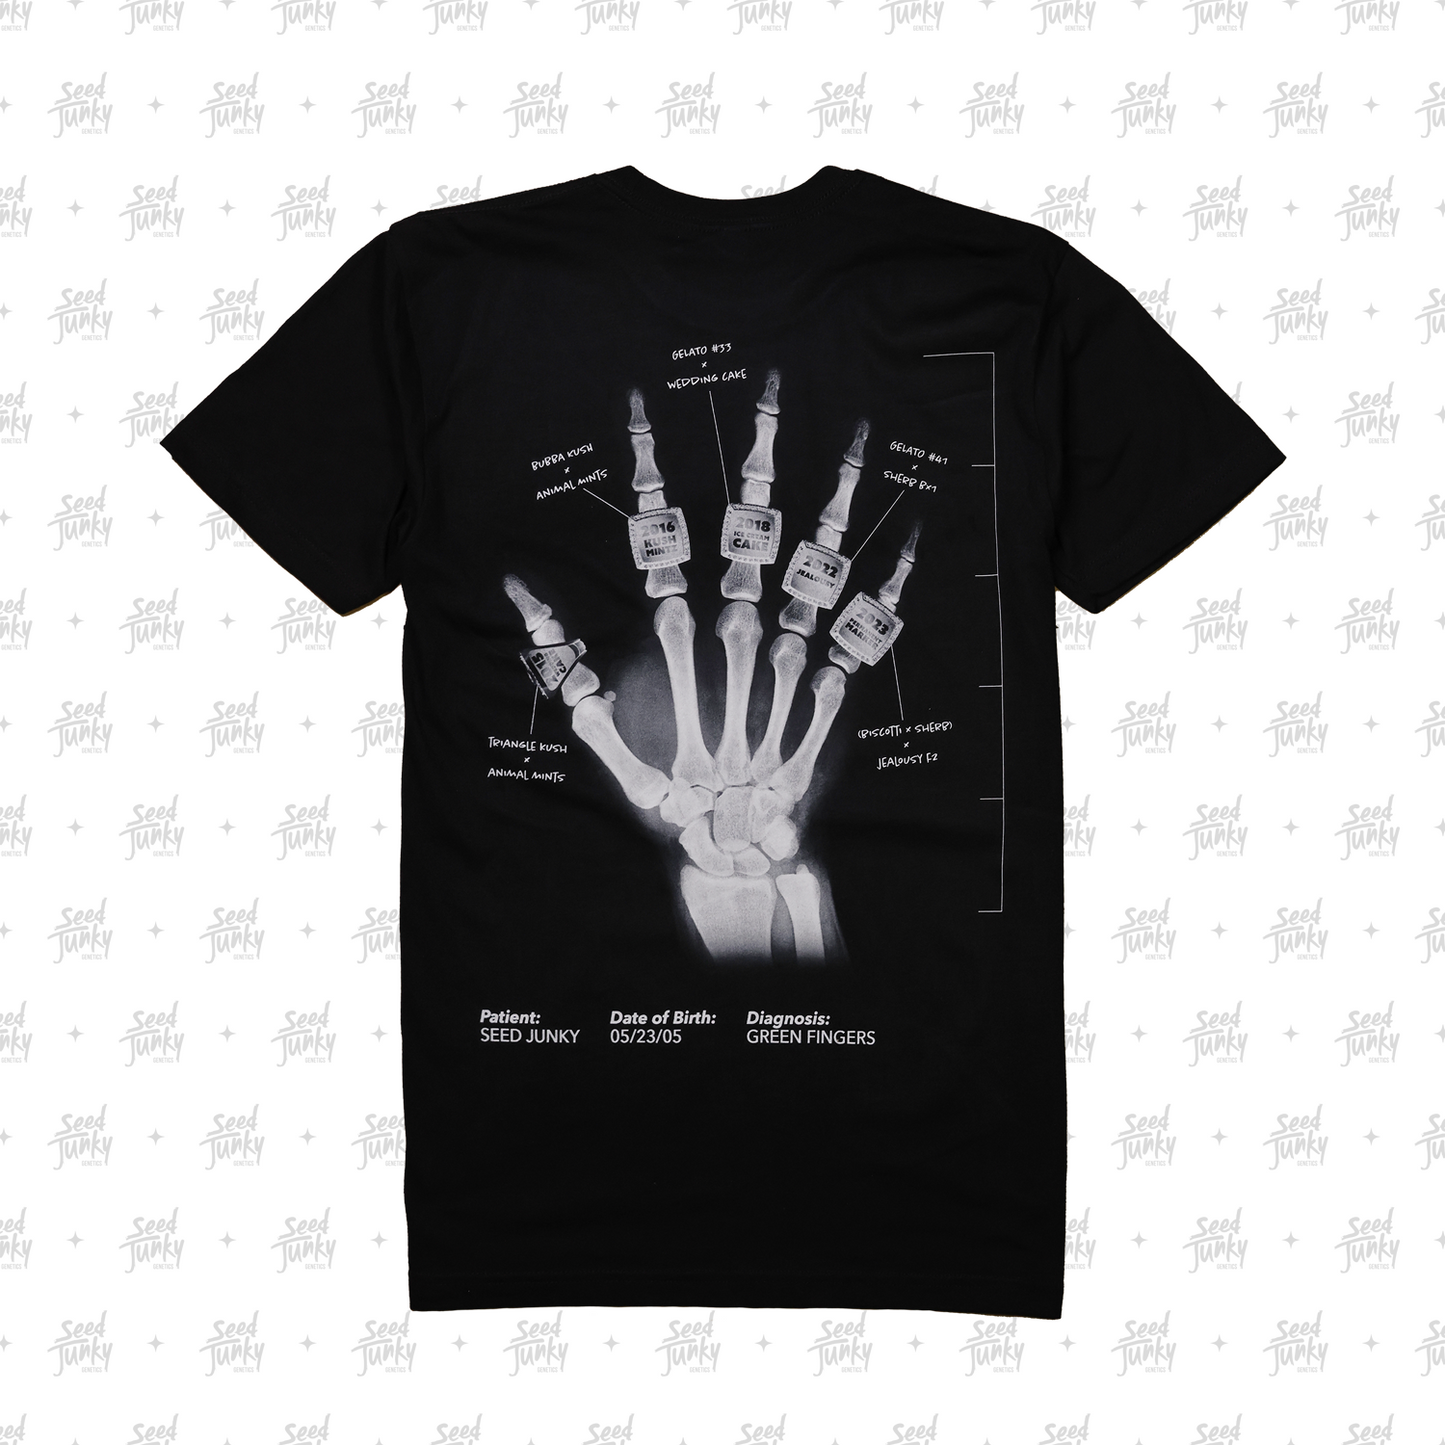 Seed Junky X-Ray T-Shirt